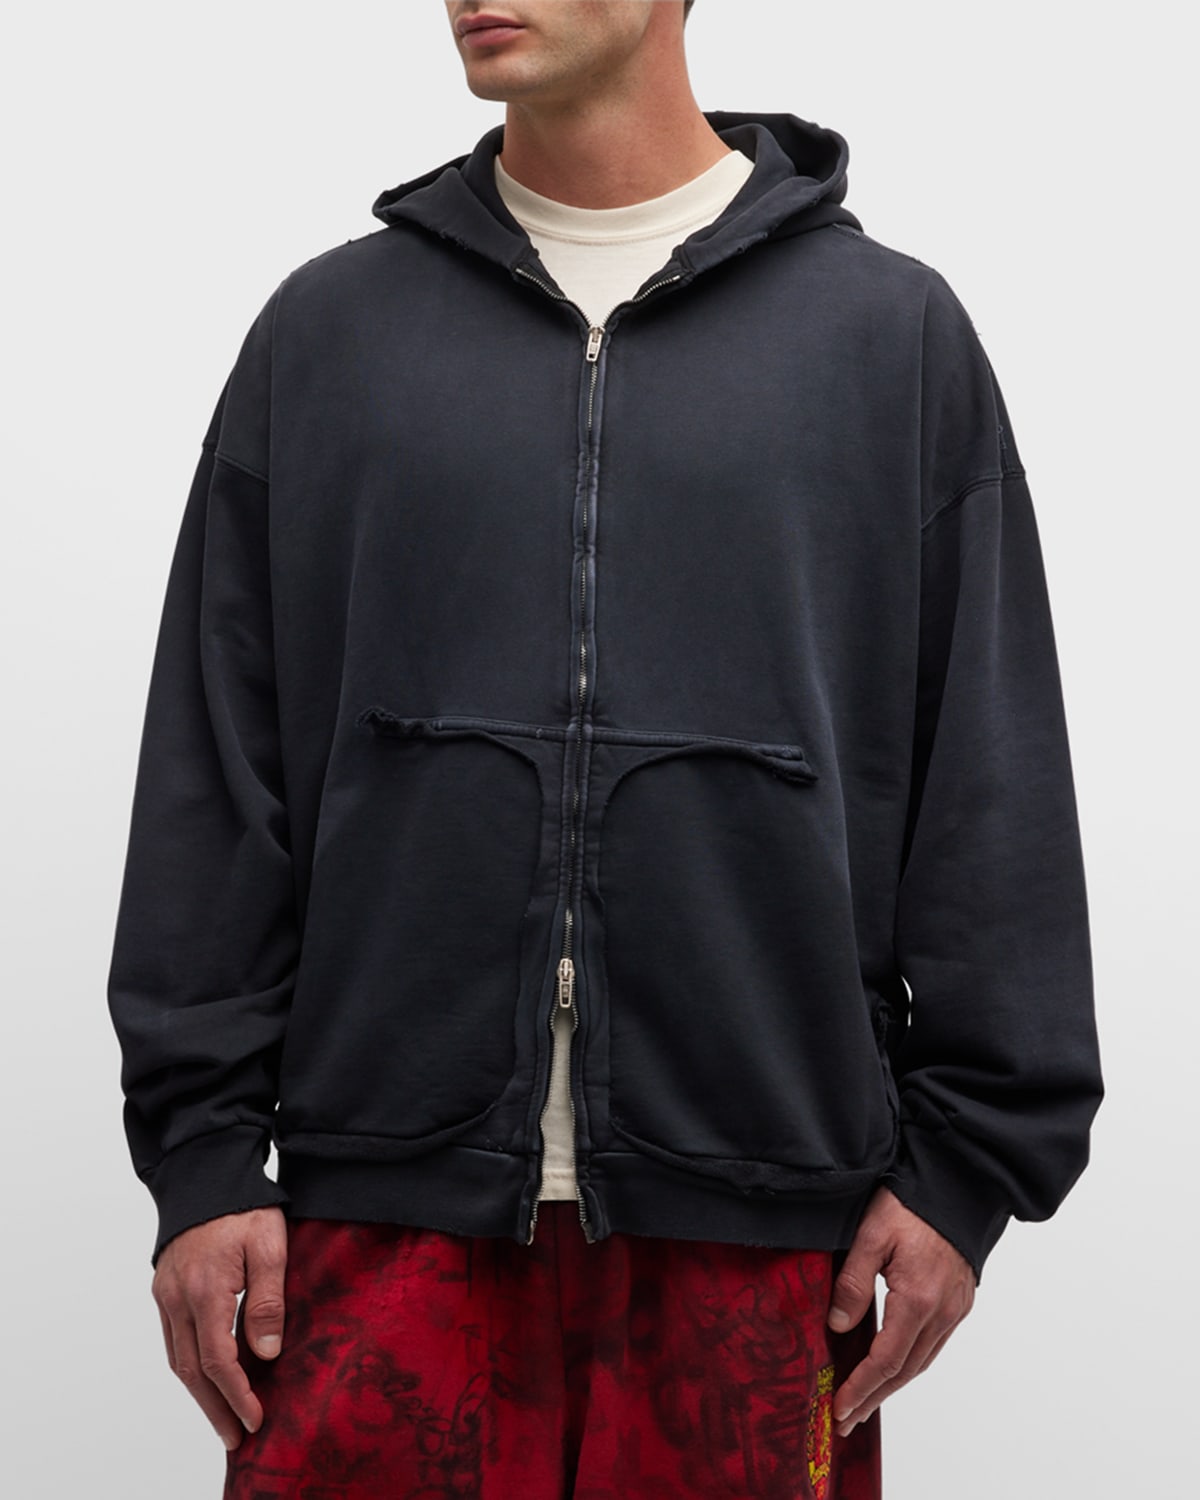 Balenciaga Oversize Distressed Logo Hoodie In Red